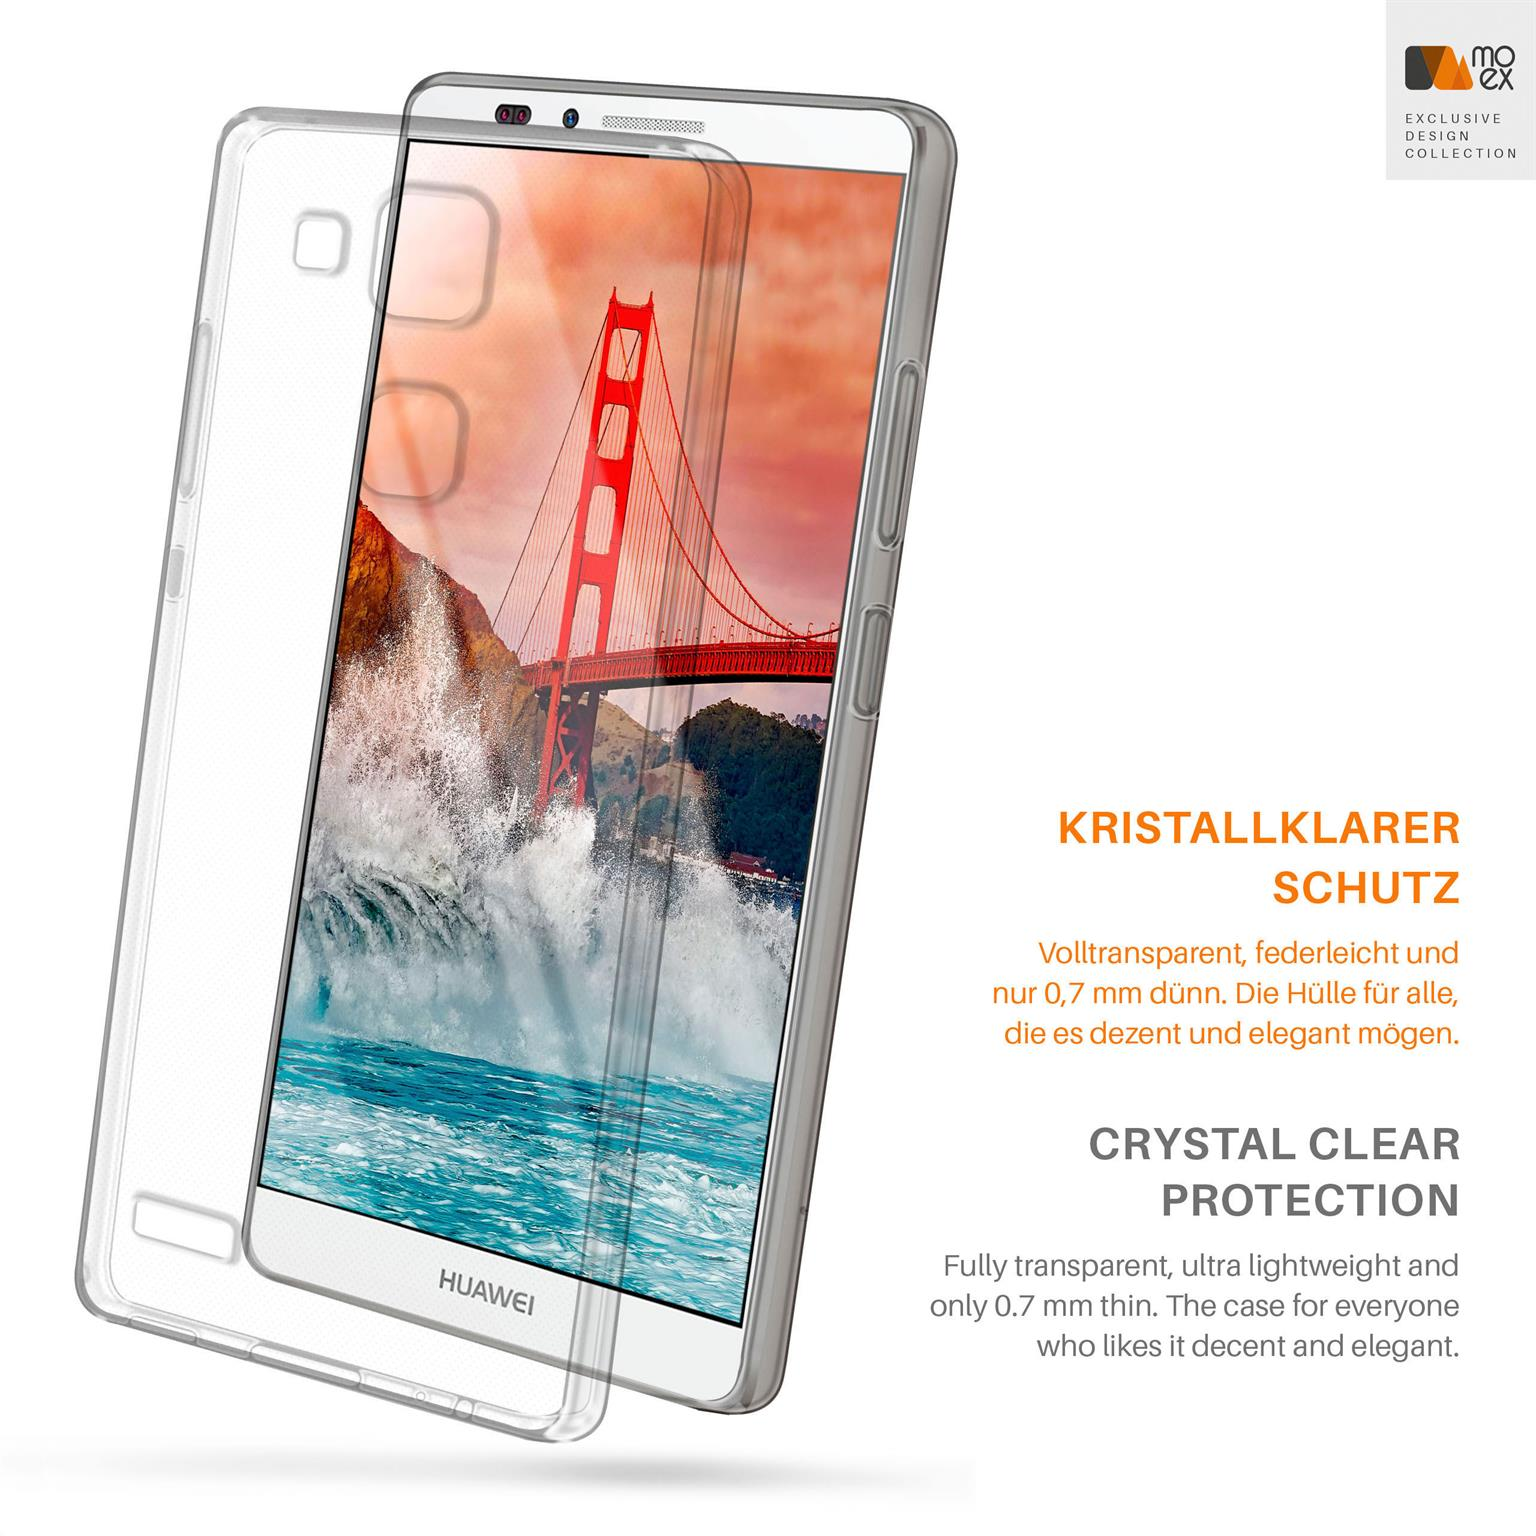 Mate MOEX Case, Crystal-Clear Huawei, 7, Ascend Aero Backcover,